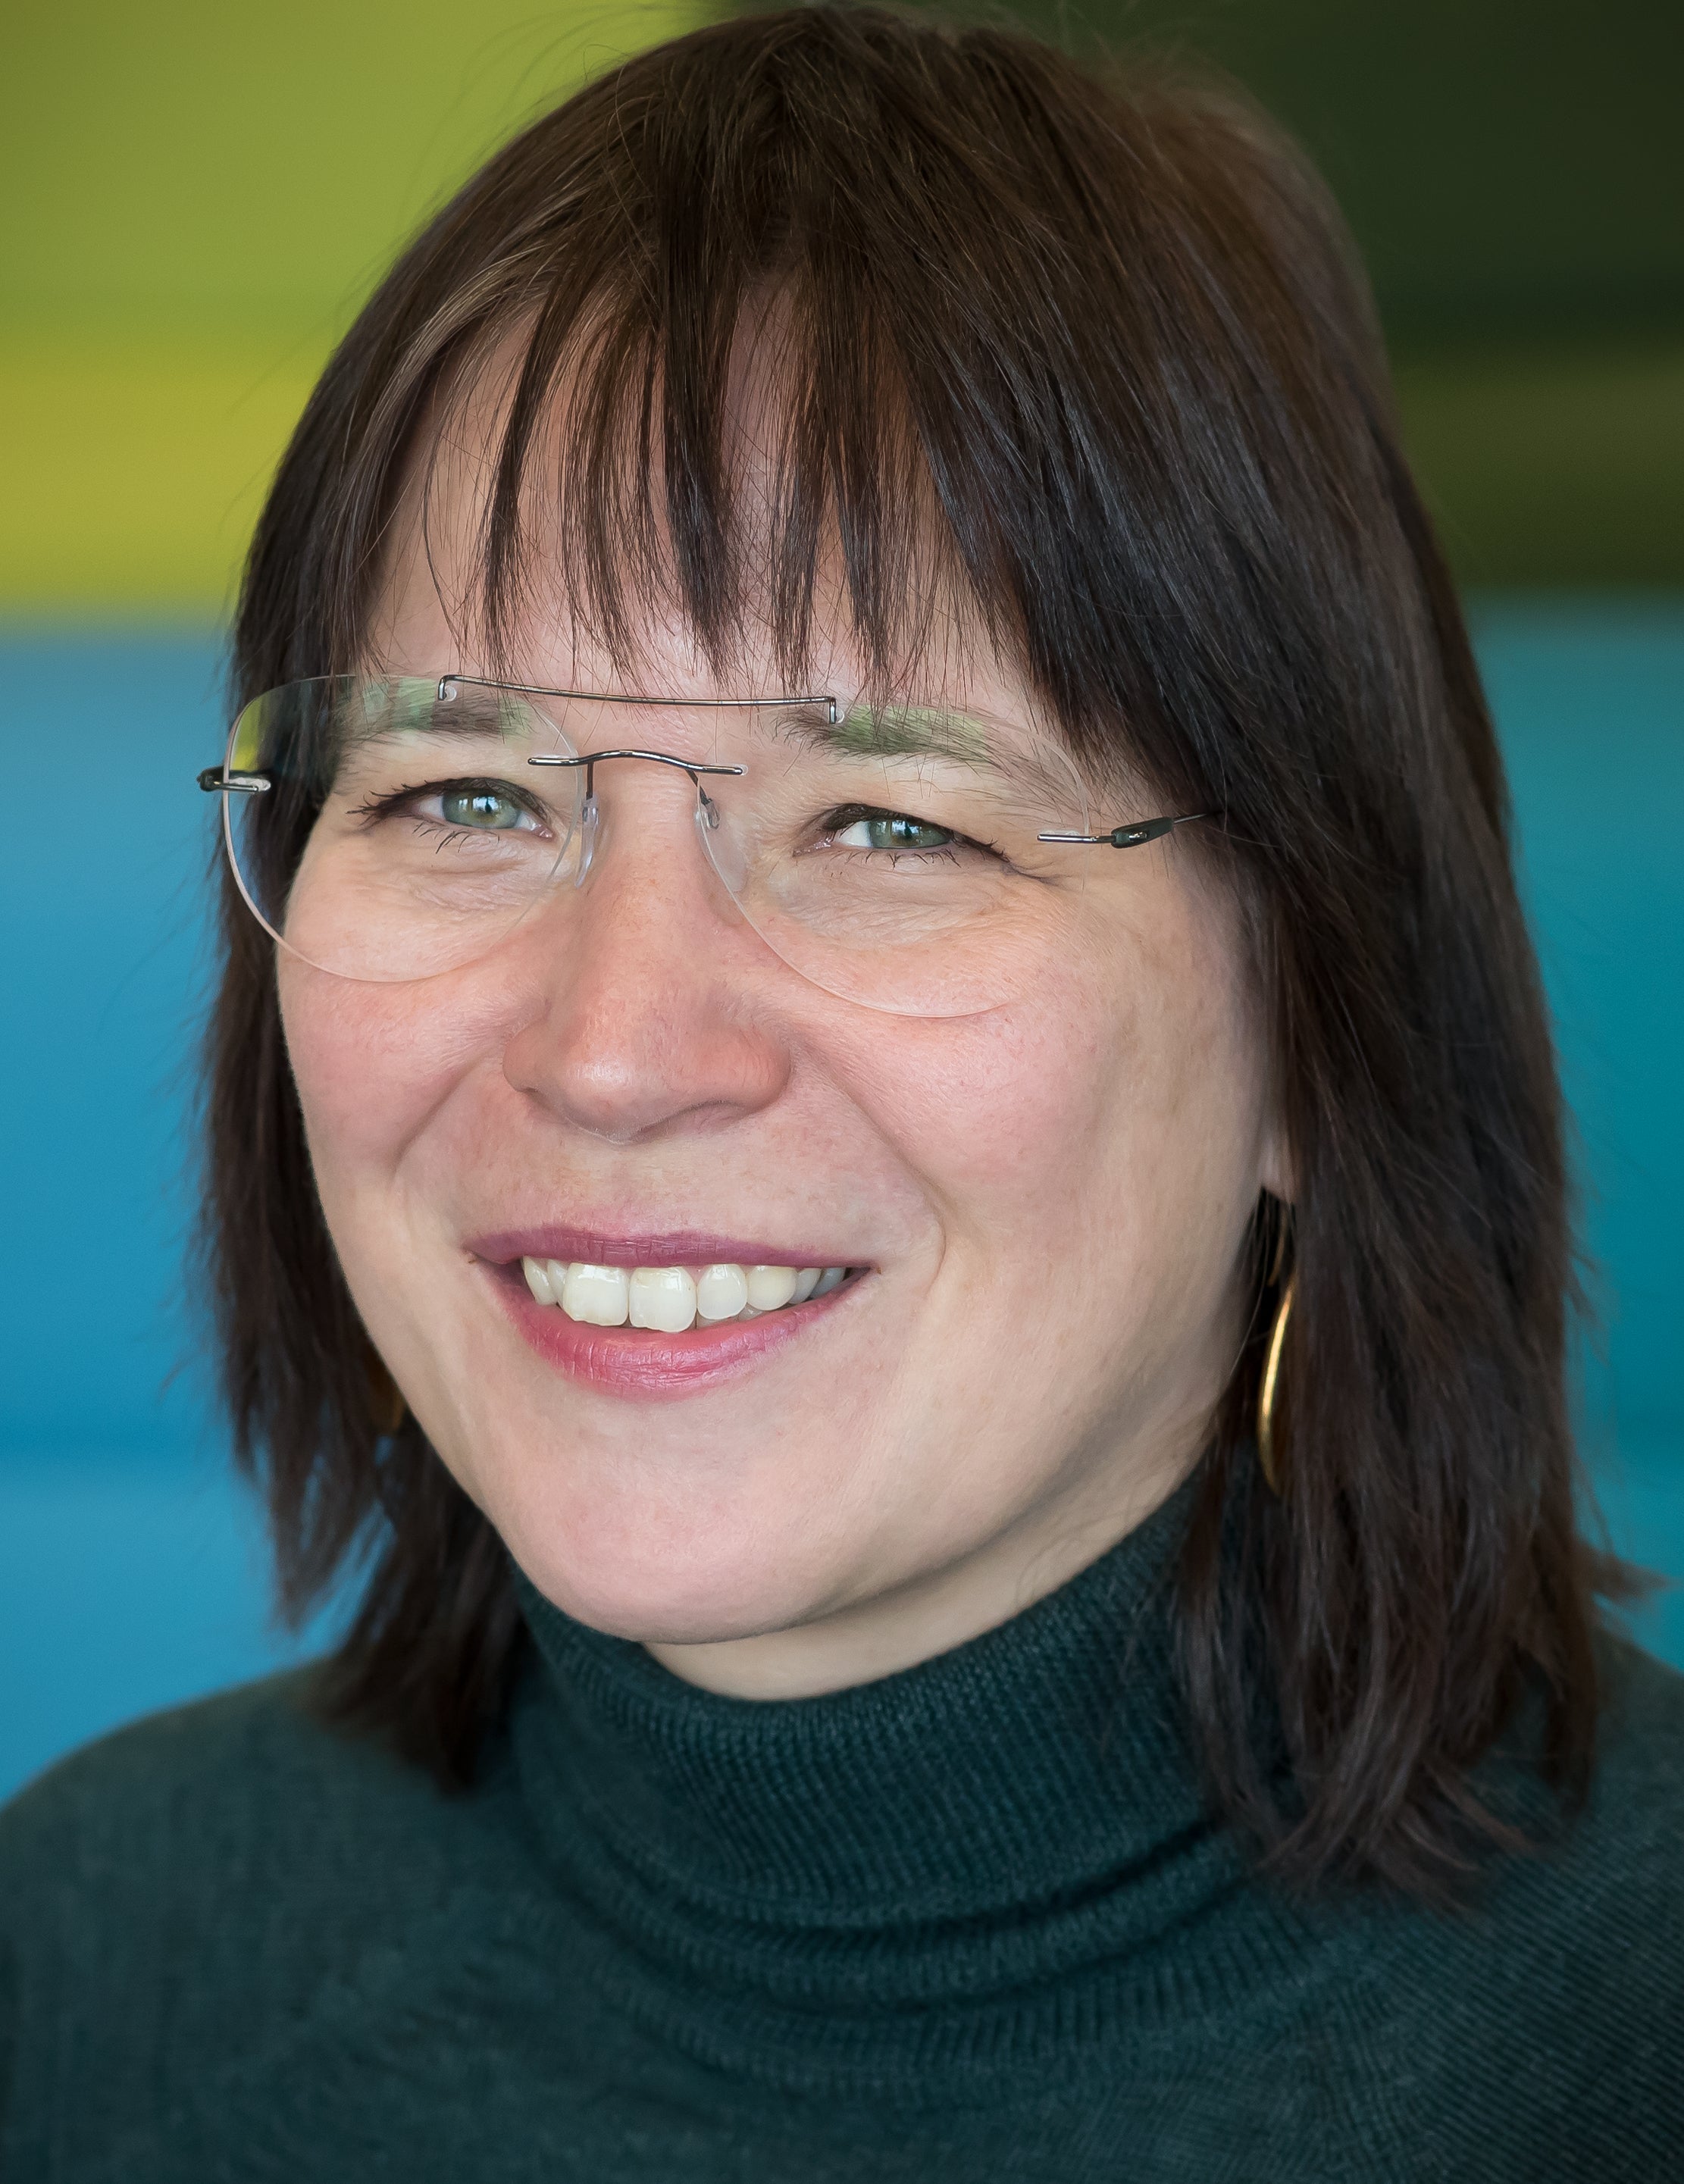 Portrait photograph of smiling woman with dark brown medium length hair glasses and gold earring, dressed in a dark green turtleneck.